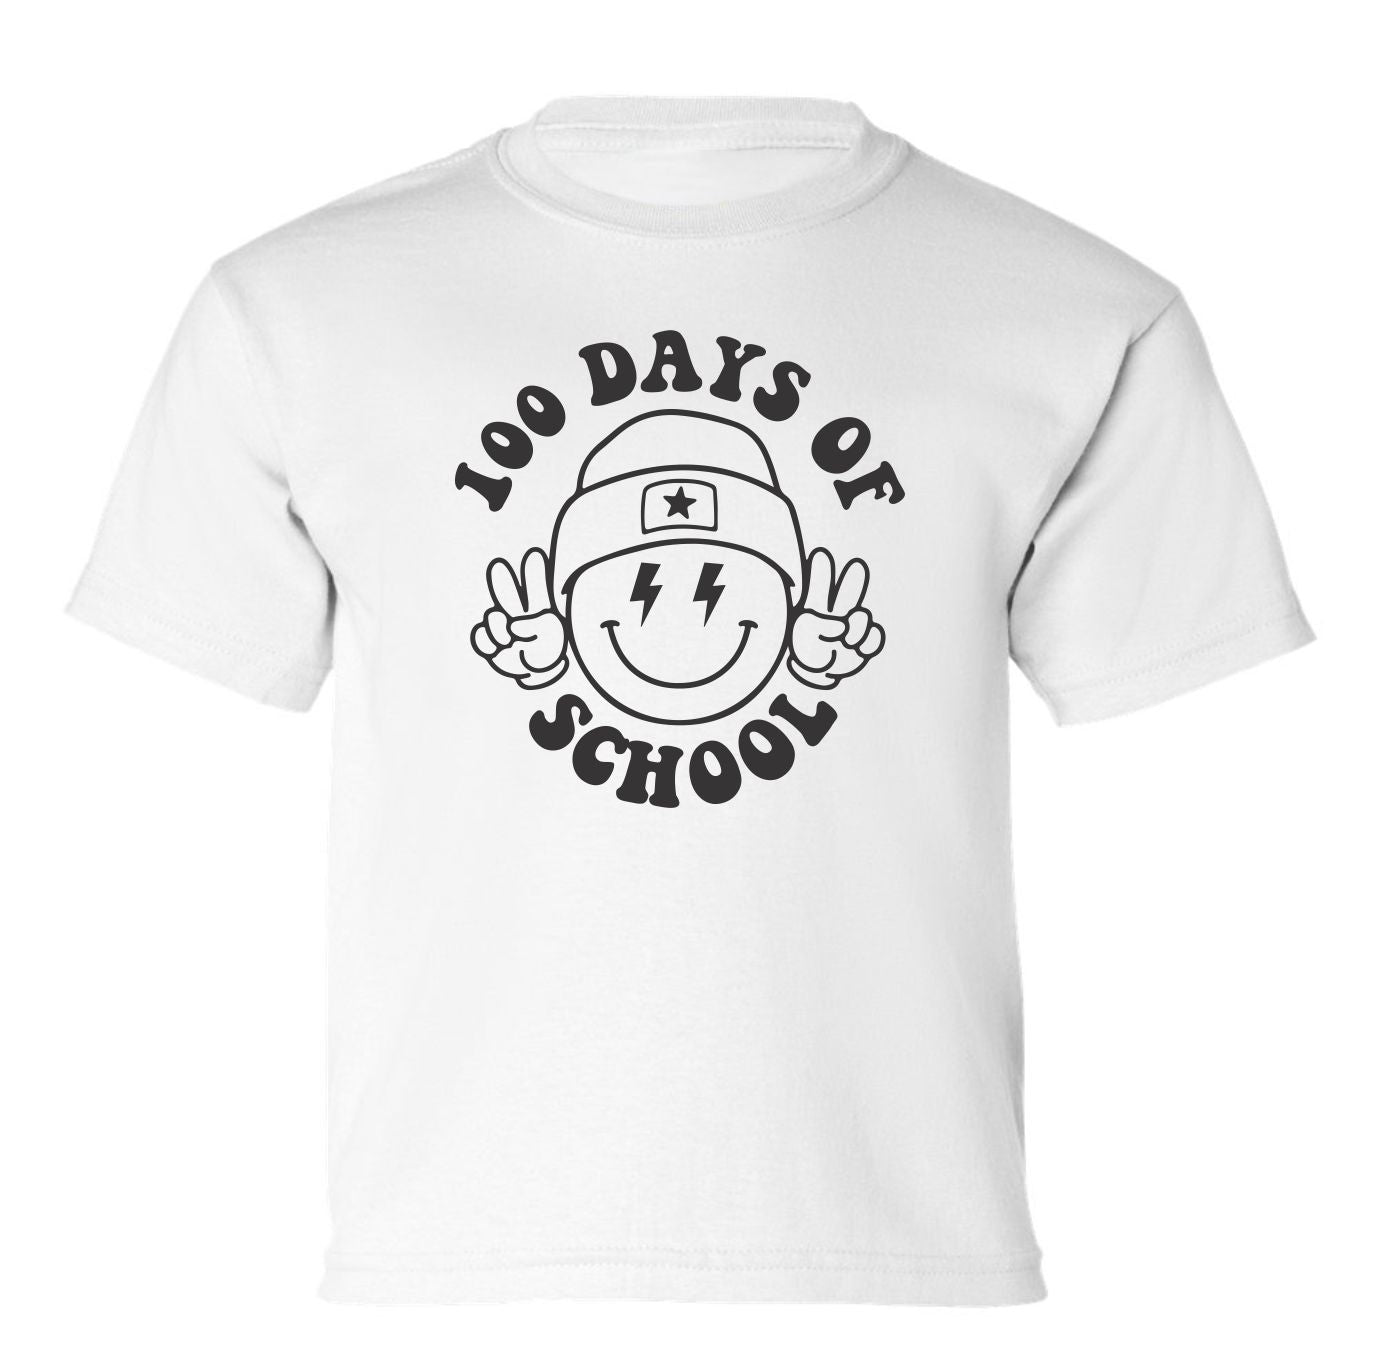 "100 Days of School" (Smilie) Toddler/Youth T-Shirt